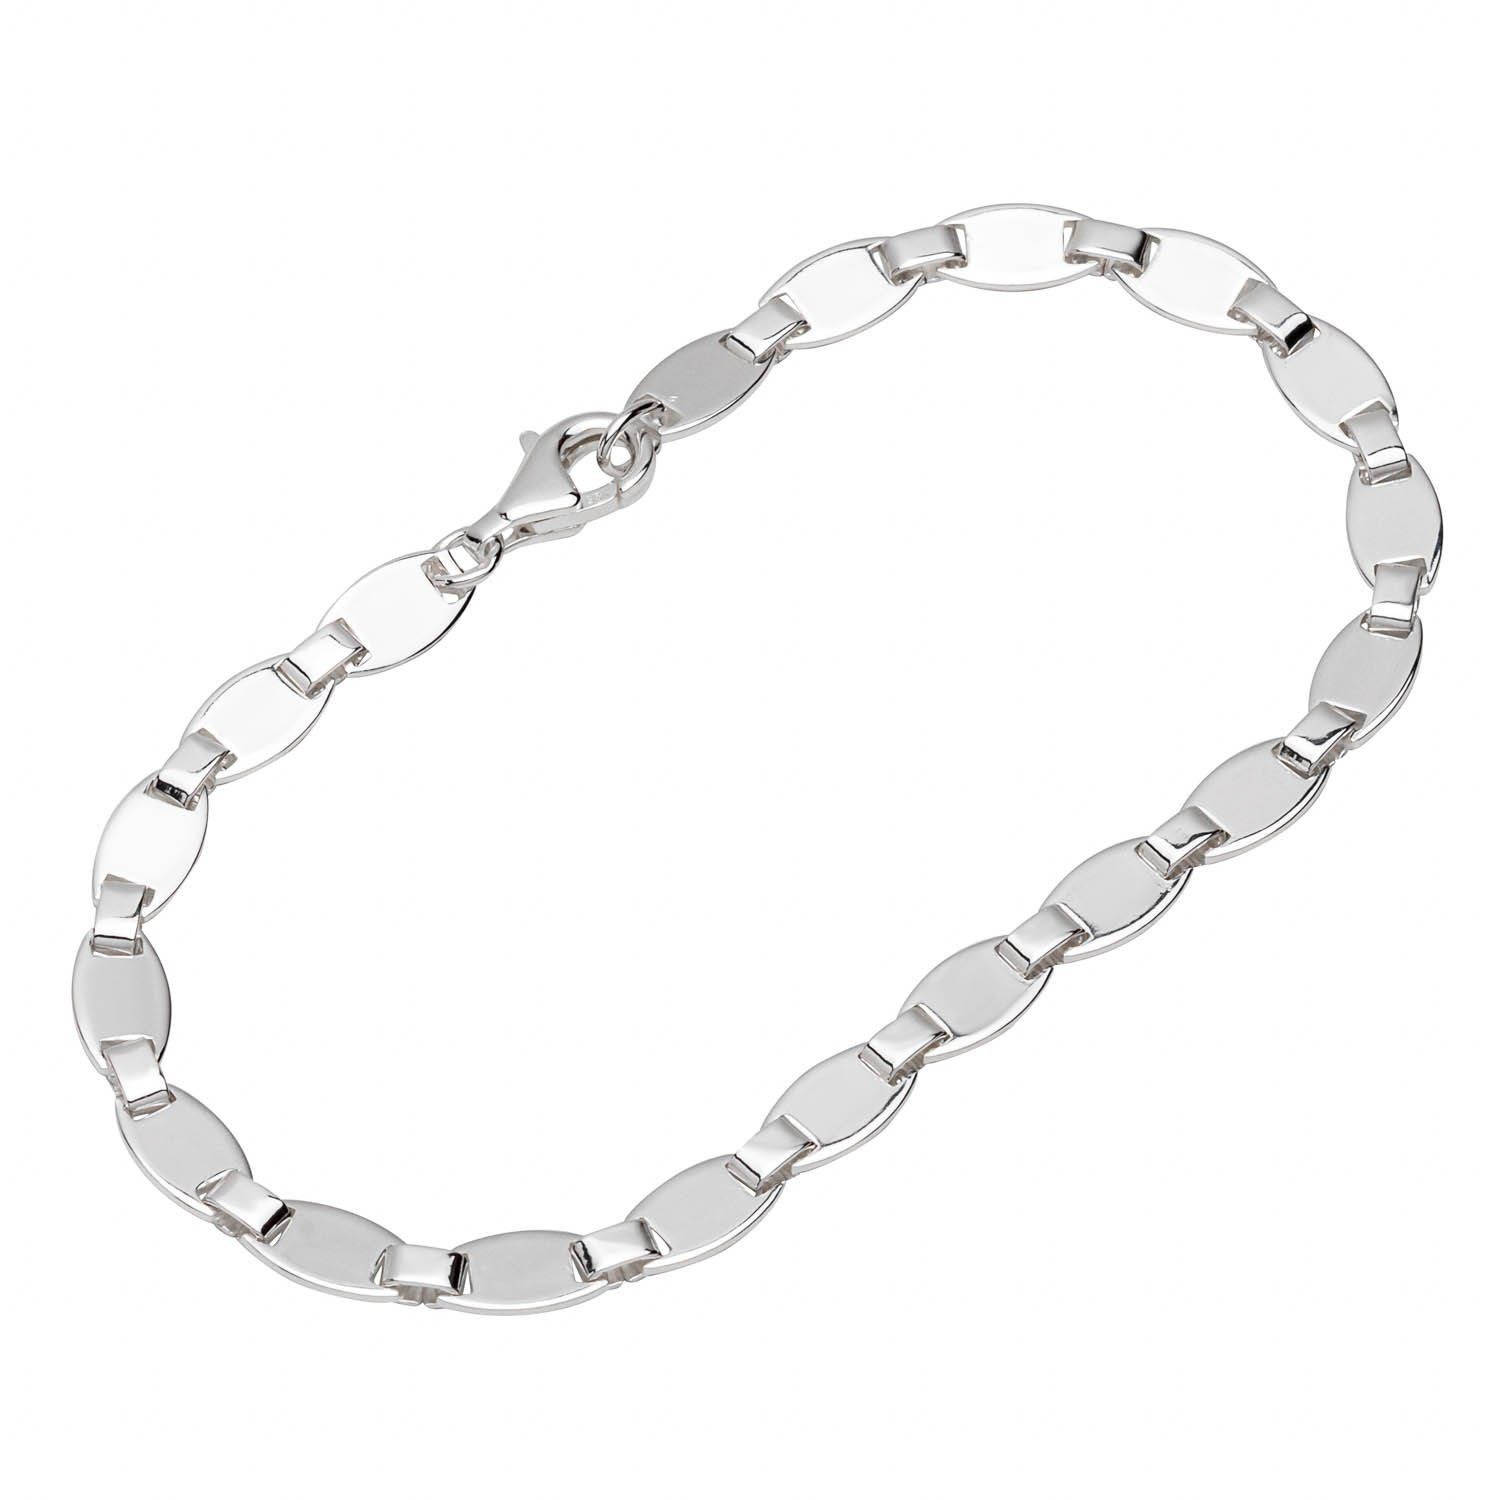 NKlaus Silberarmband Armband 925 Sterling Silber 21cm Calla Kette Unise (1 Stück), Made in Germany